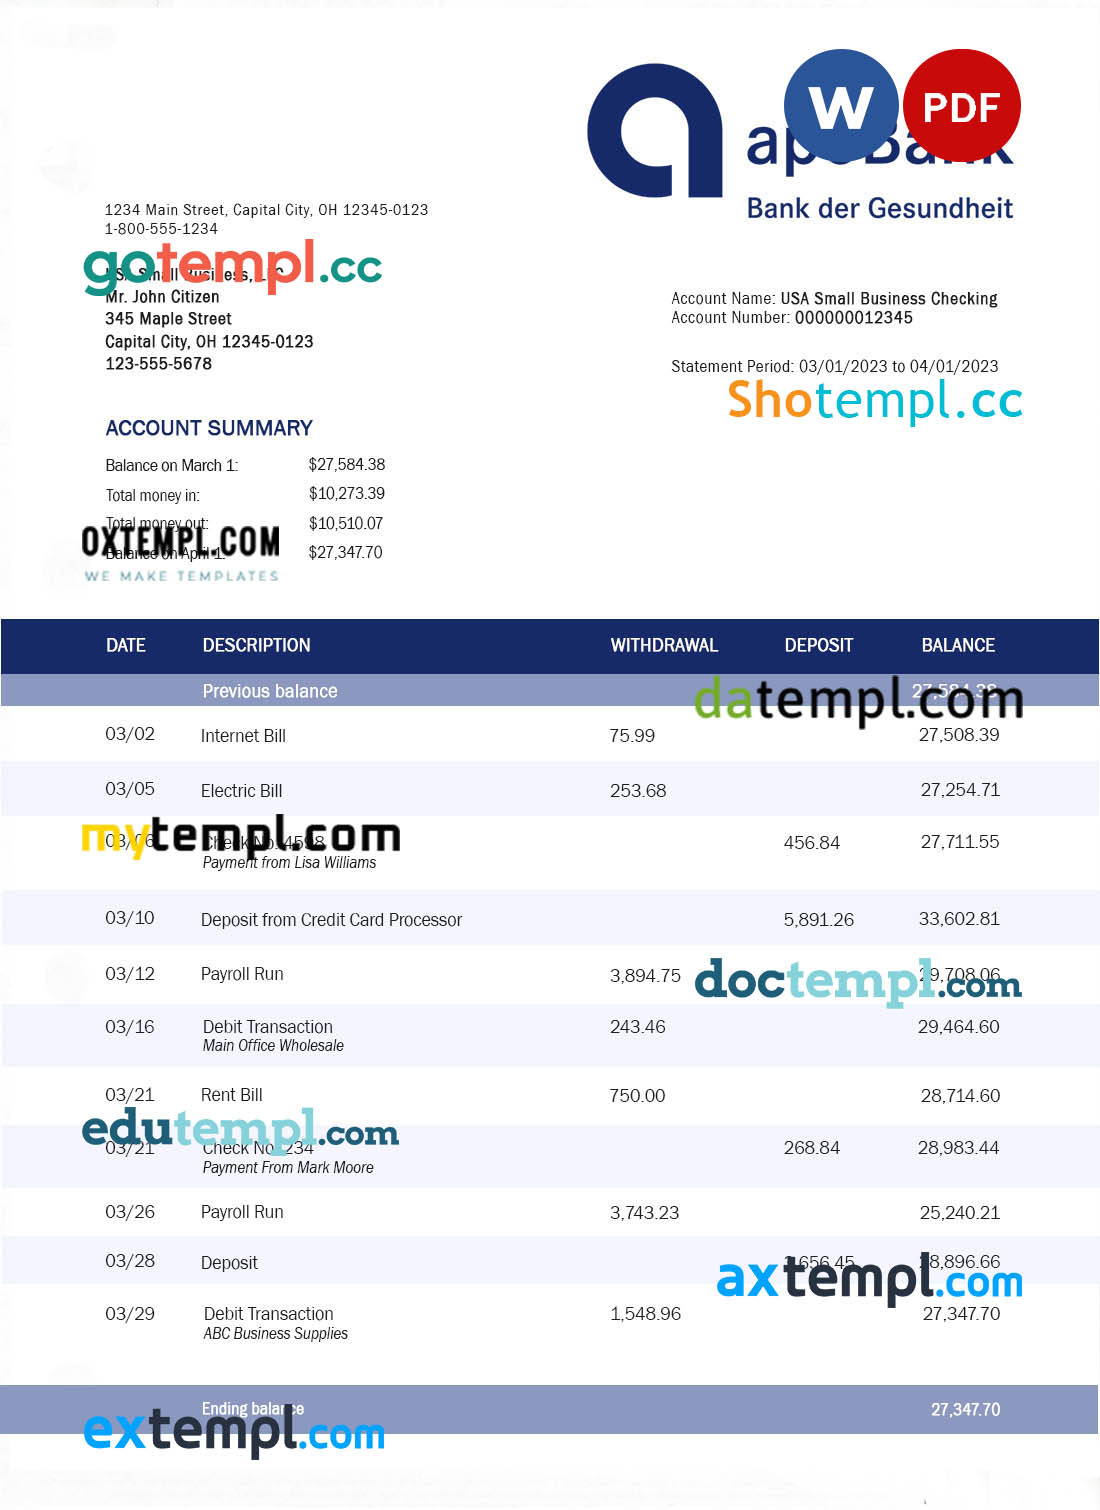 Apobank enterprise account statement Word and PDF template